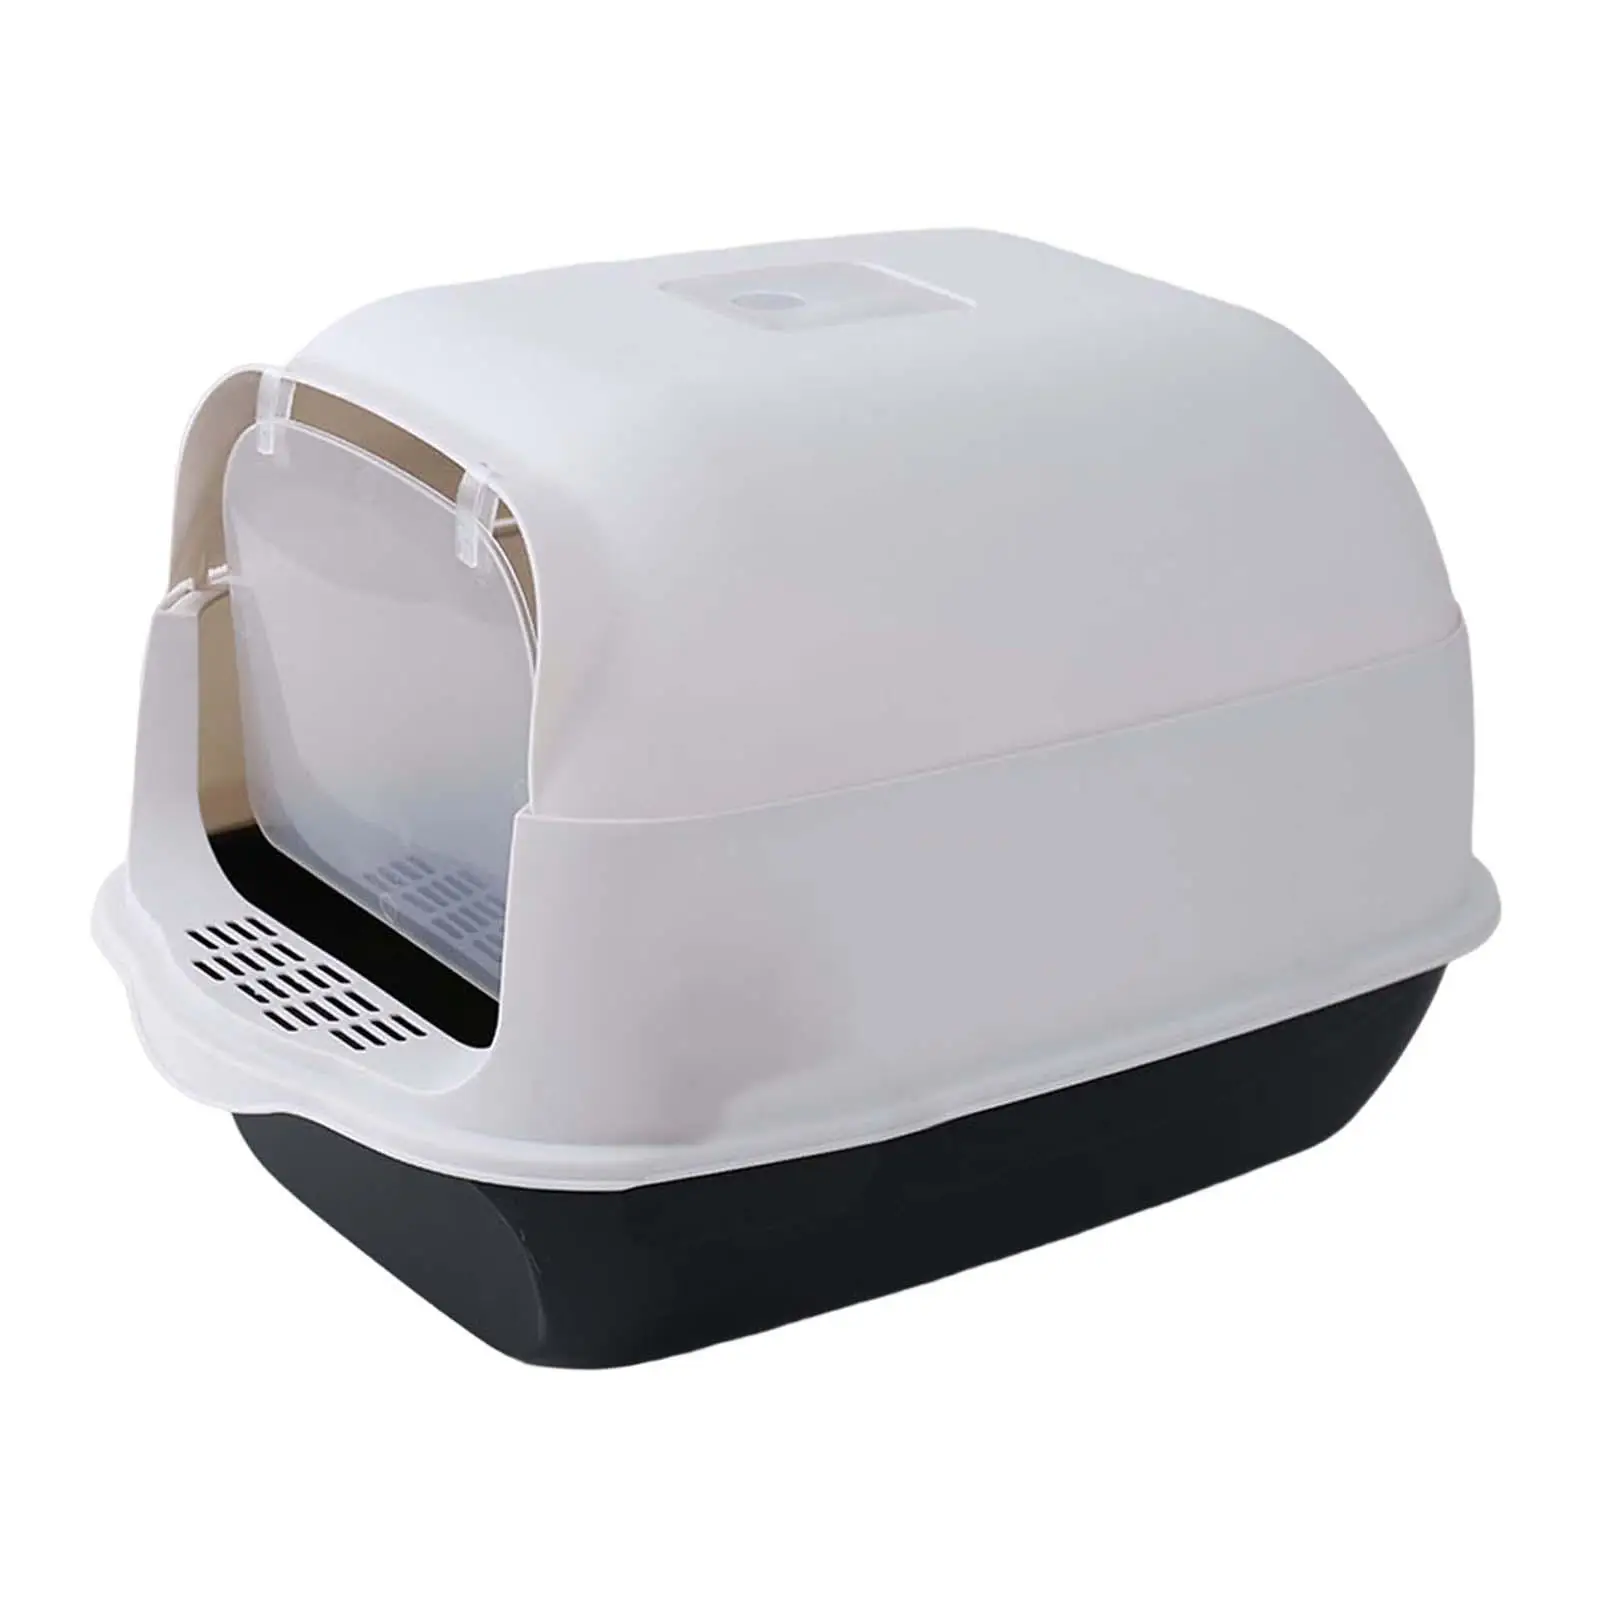 Large Cat Litter Box Easy Tidy with Training Waterproof Supplies Tray Reusable Toilet for Rabbit Kitten Outdoor Travel